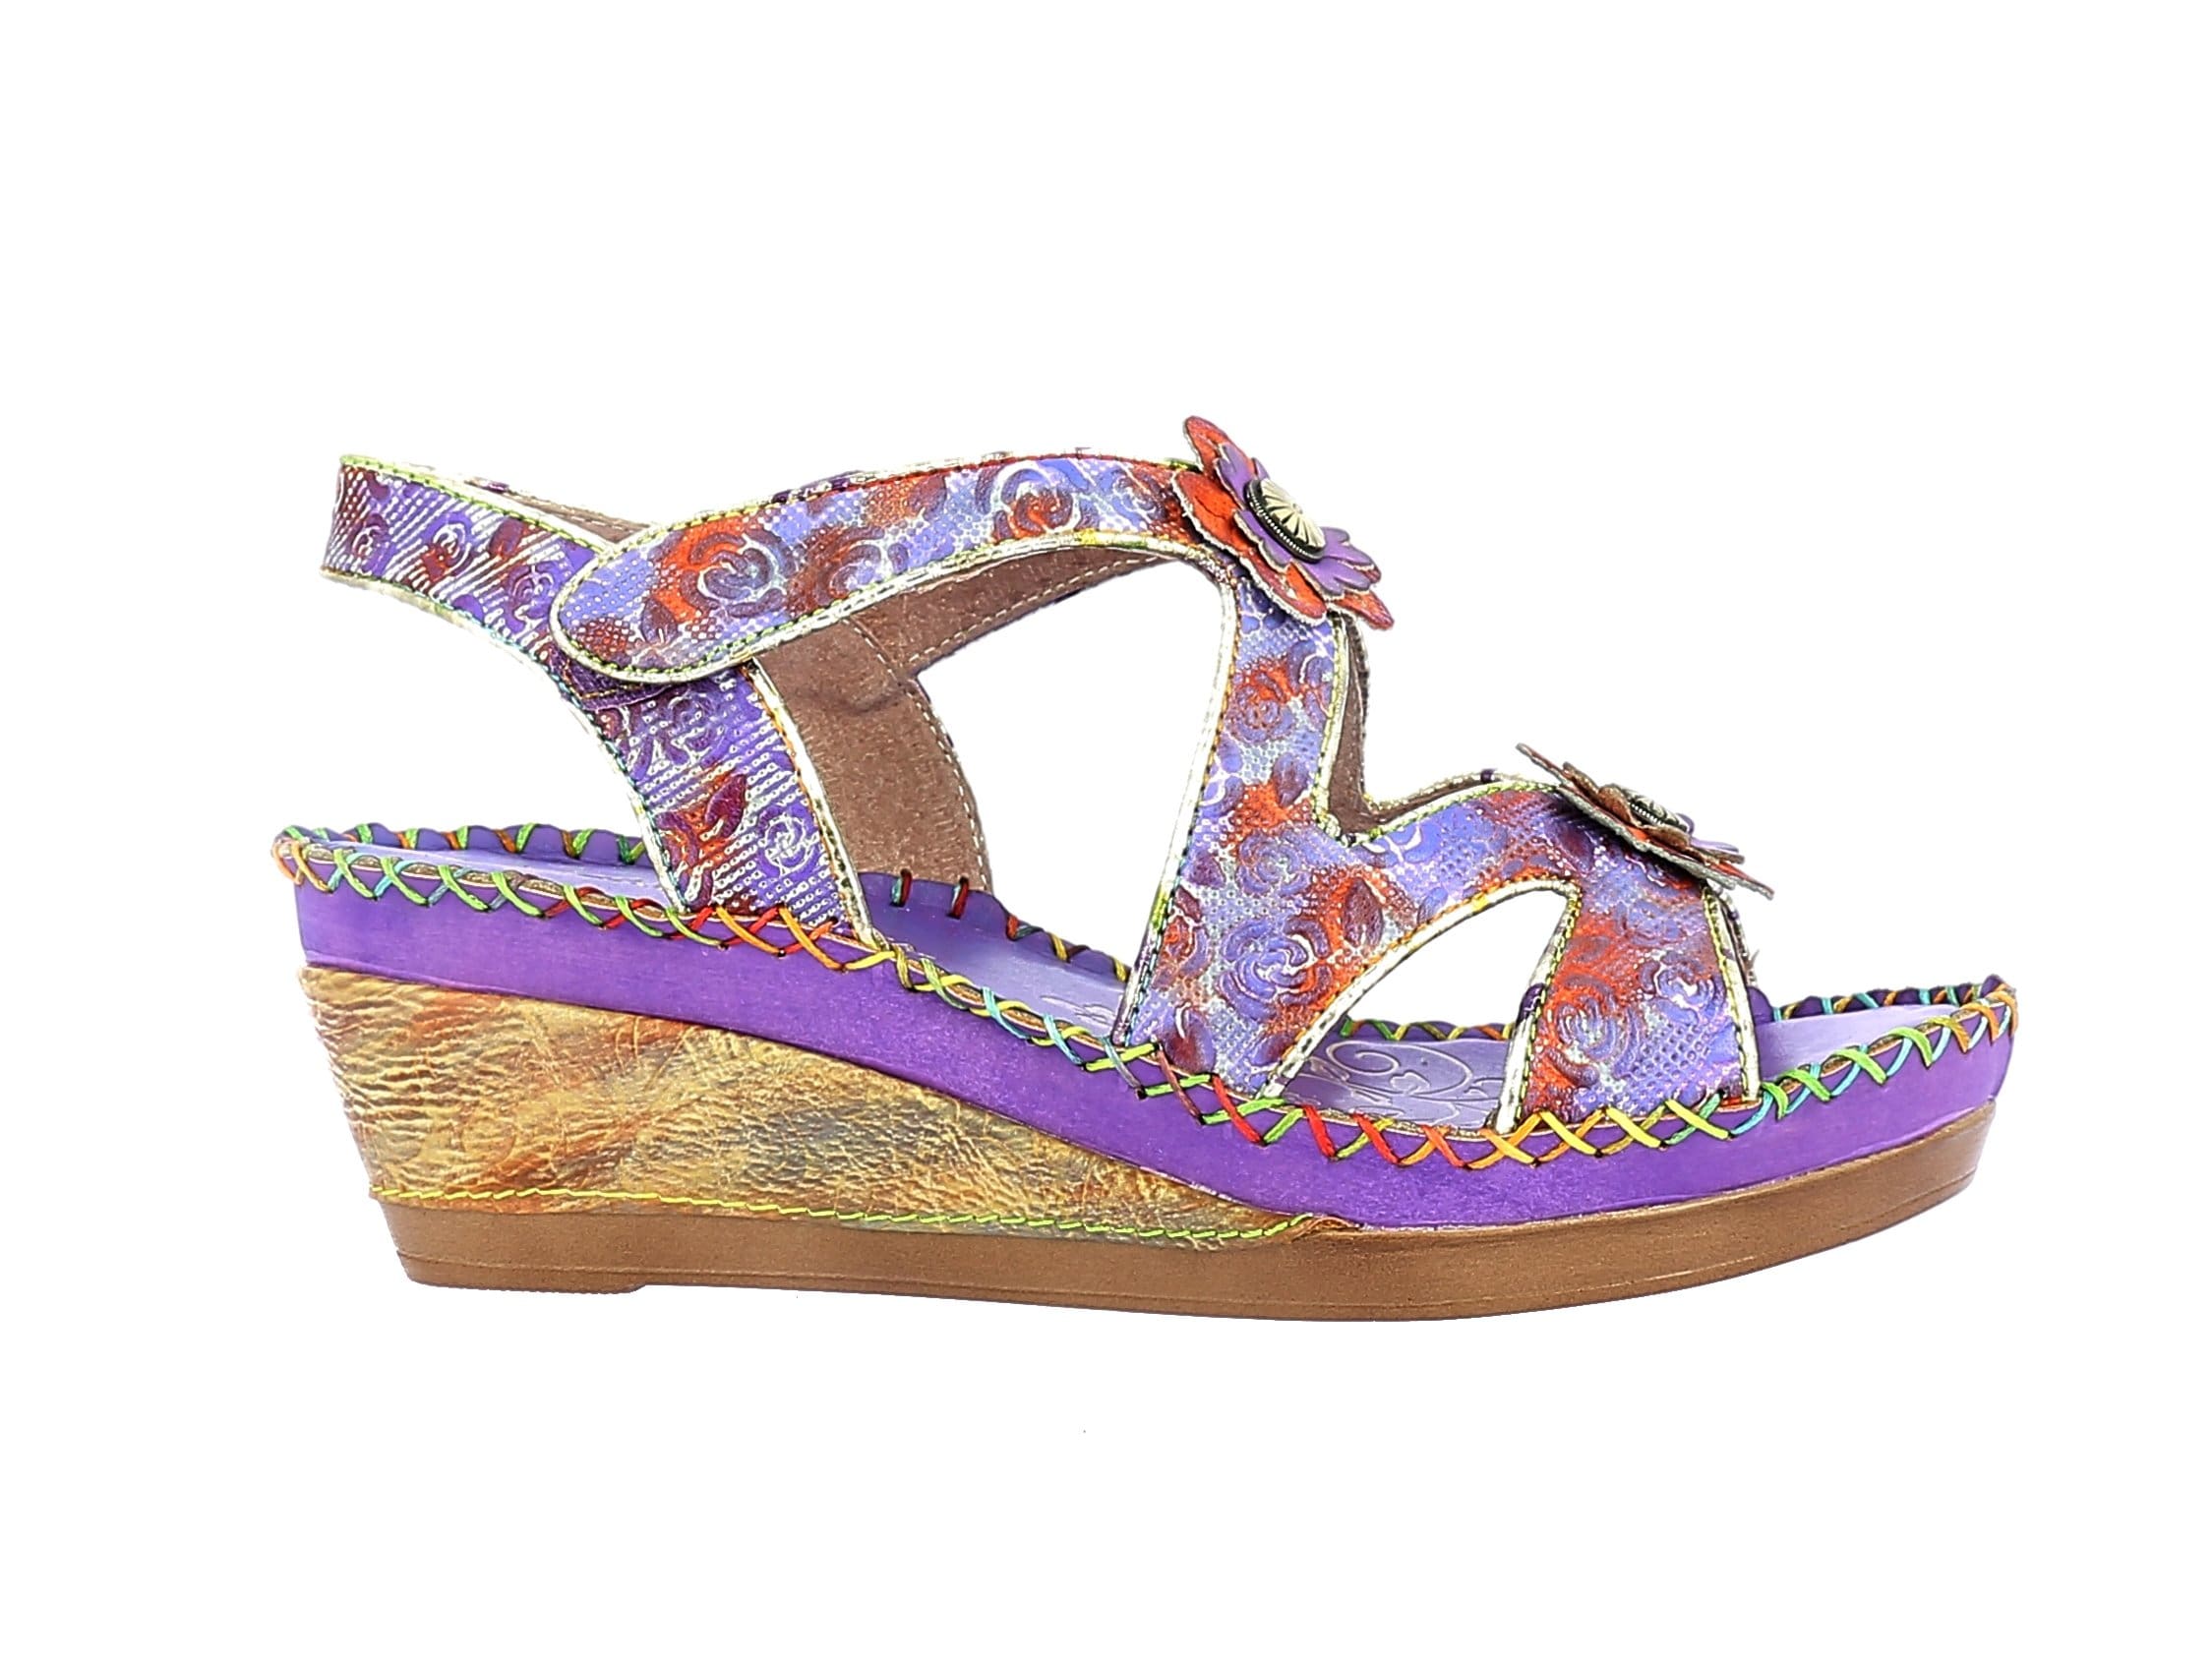 Chaussures BECATRICEO 03 - 35 / PURPLE - Sandale